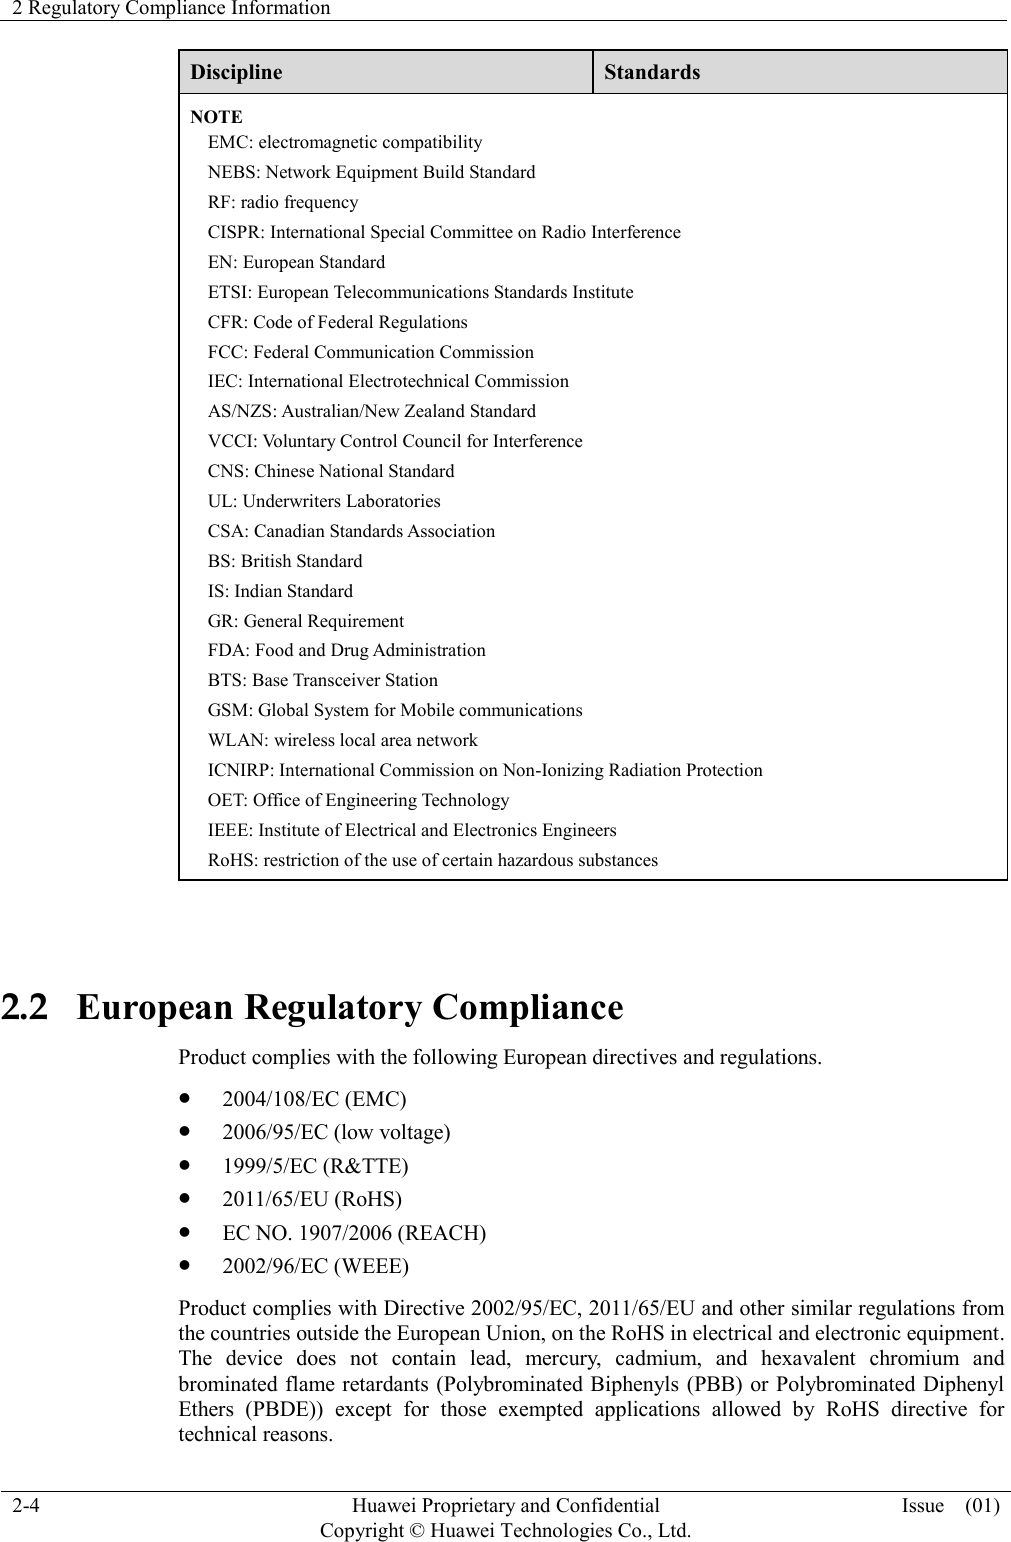 2 Regulatory Compliance Information    2-4 Huawei Proprietary and Confidential                                     Copyright © Huawei Technologies Co., Ltd. Issue    (01)  Discipline Standards NOTE EMC: electromagnetic compatibility NEBS: Network Equipment Build Standard RF: radio frequency CISPR: International Special Committee on Radio Interference EN: European Standard ETSI: European Telecommunications Standards Institute CFR: Code of Federal Regulations FCC: Federal Communication Commission IEC: International Electrotechnical Commission AS/NZS: Australian/New Zealand Standard VCCI: Voluntary Control Council for Interference CNS: Chinese National Standard UL: Underwriters Laboratories CSA: Canadian Standards Association BS: British Standard IS: Indian Standard GR: General Requirement FDA: Food and Drug Administration BTS: Base Transceiver Station GSM: Global System for Mobile communications WLAN: wireless local area network ICNIRP: International Commission on Non-Ionizing Radiation Protection OET: Office of Engineering Technology IEEE: Institute of Electrical and Electronics Engineers RoHS: restriction of the use of certain hazardous substances  2.2   European Regulatory Compliance Product complies with the following European directives and regulations.  2004/108/EC (EMC)  2006/95/EC (low voltage)  1999/5/EC (R&amp;TTE)  2011/65/EU (RoHS)  EC NO. 1907/2006 (REACH)  2002/96/EC (WEEE) Product complies with Directive 2002/95/EC, 2011/65/EU and other similar regulations from the countries outside the European Union, on the RoHS in electrical and electronic equipment. The  device  does  not  contain  lead,  mercury,  cadmium,  and  hexavalent  chromium  and brominated flame retardants (Polybrominated Biphenyls (PBB) or Polybrominated Diphenyl Ethers  (PBDE))  except  for  those  exempted  applications  allowed  by  RoHS  directive  for technical reasons.   